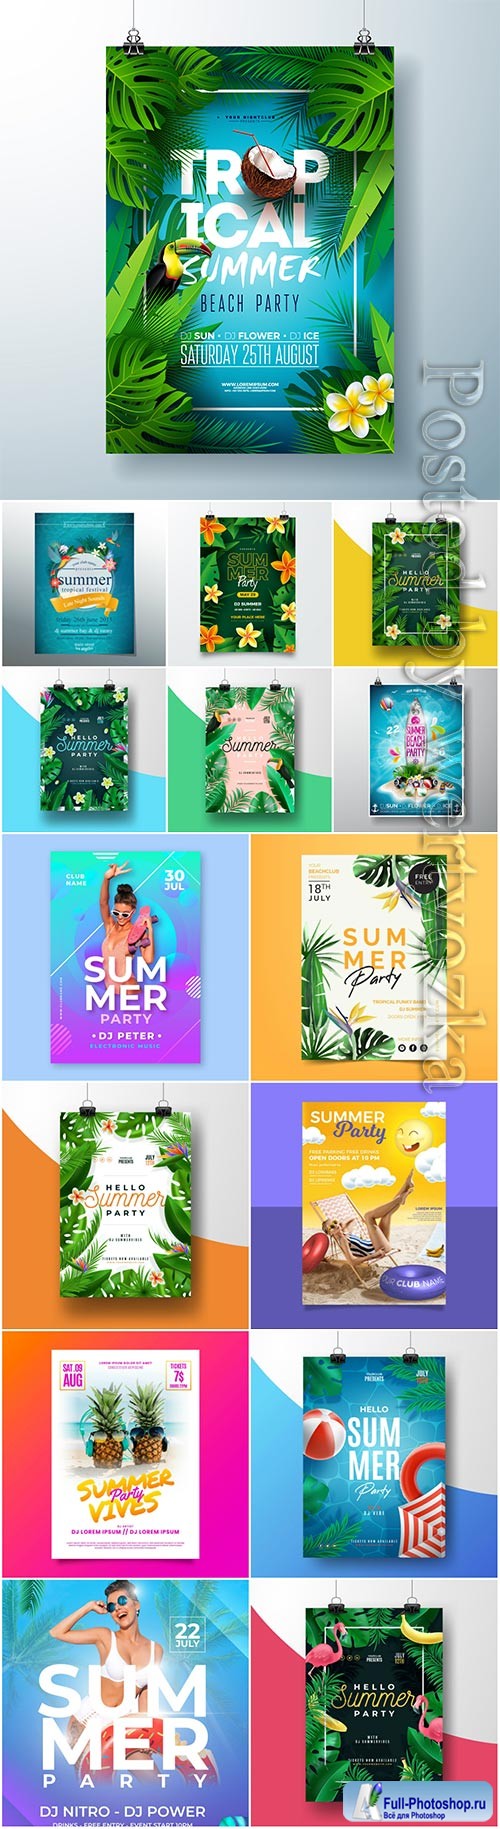 Summer party poster vector template